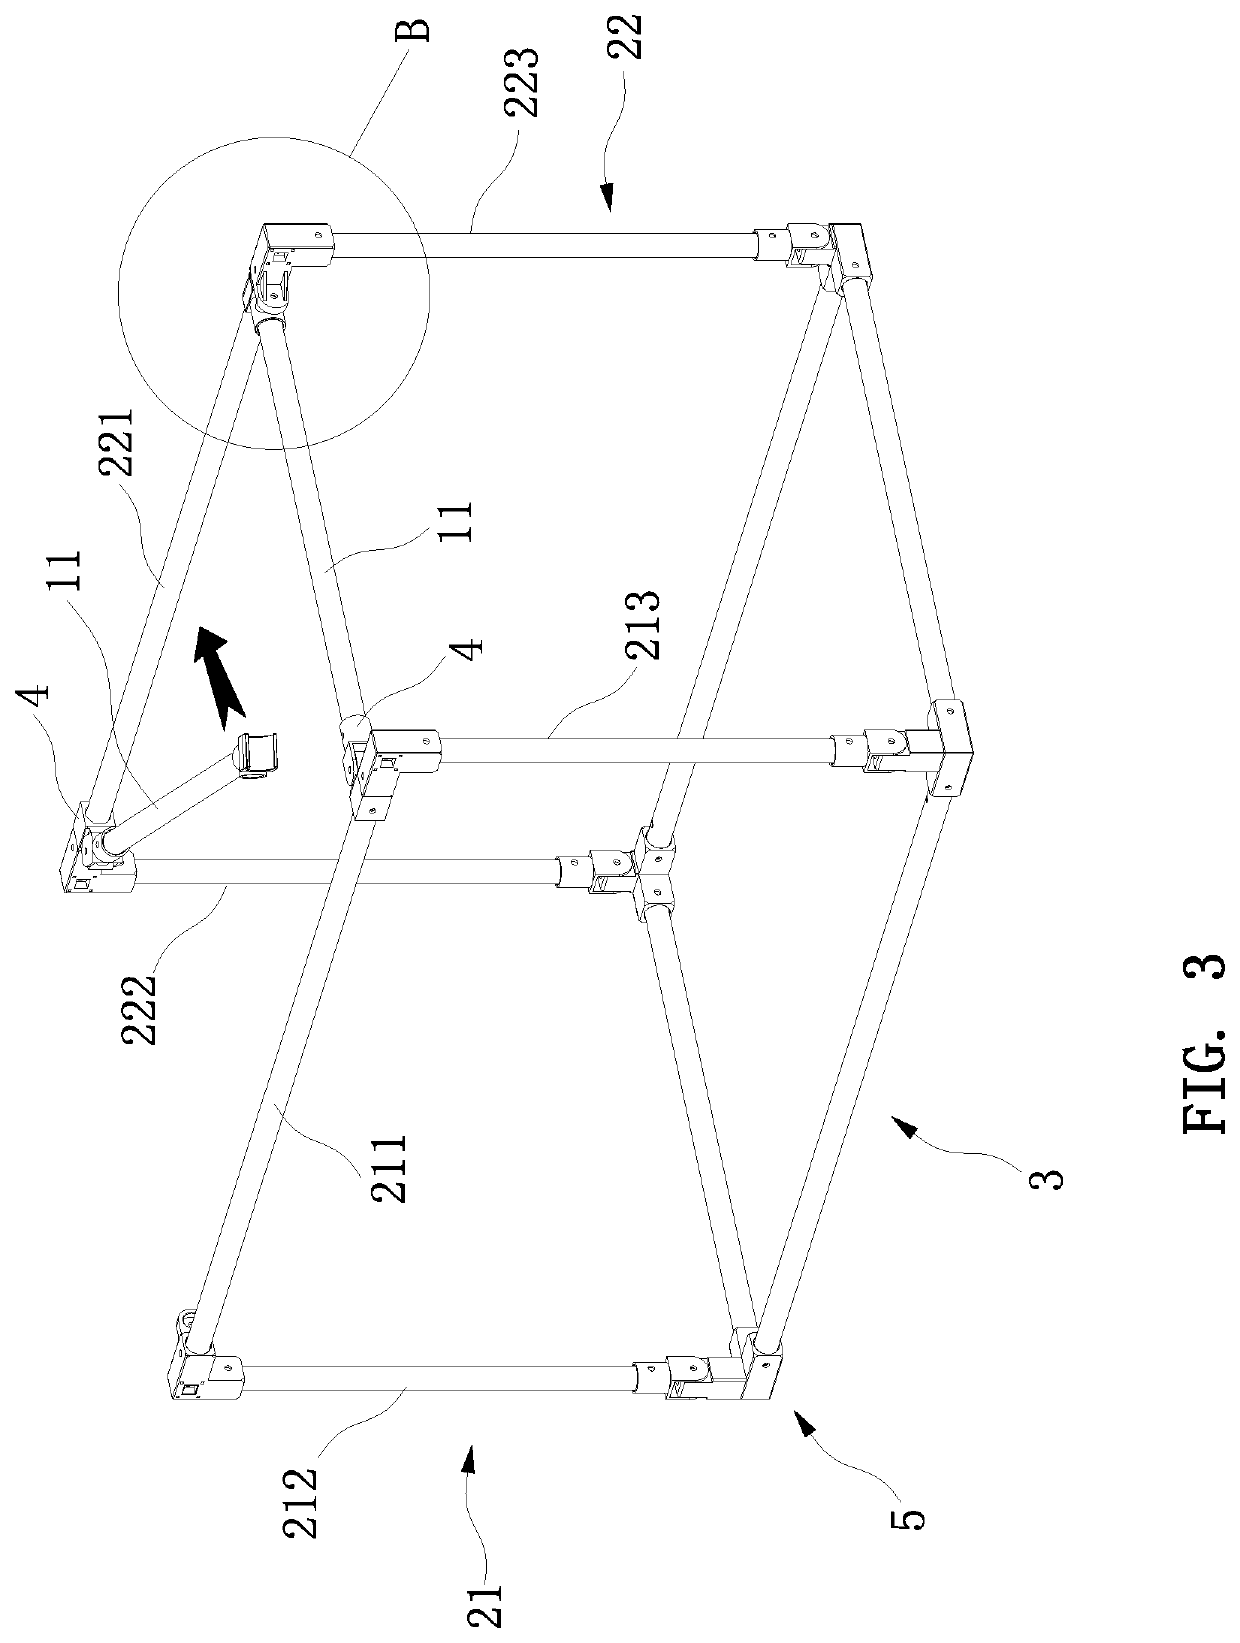 Pet tent support structure